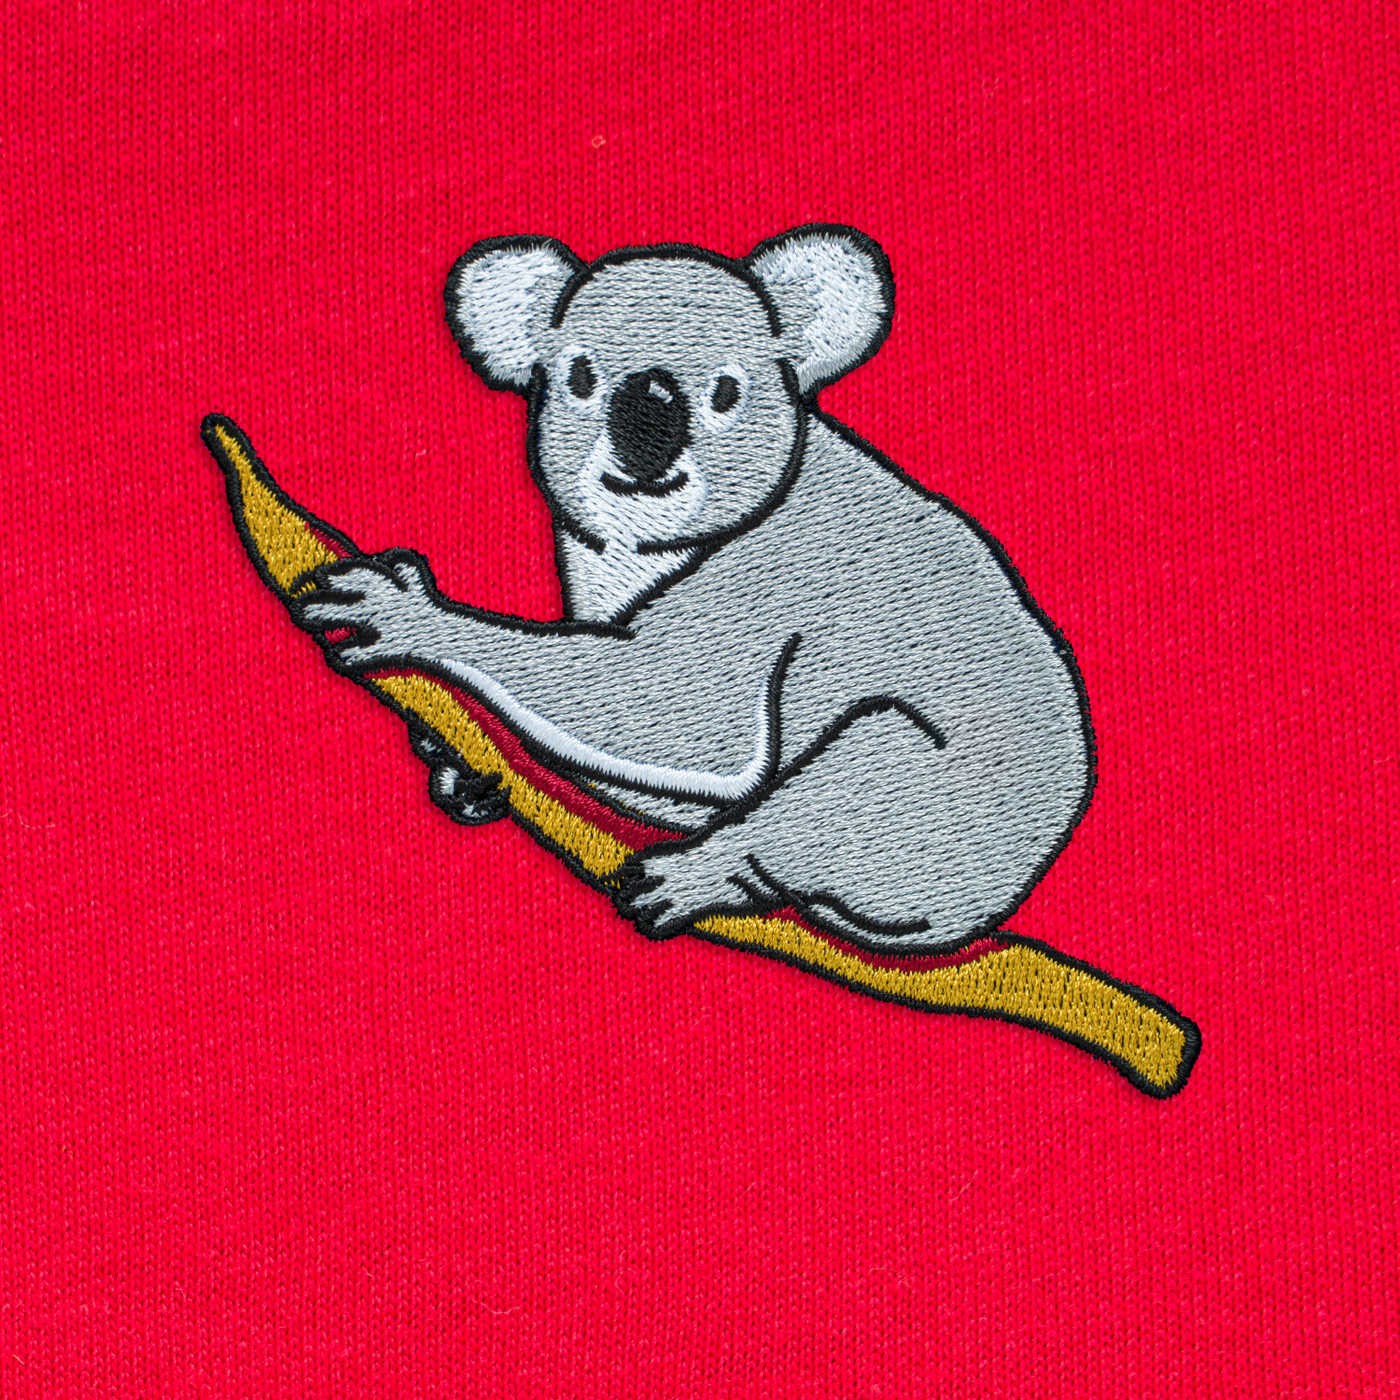 Bobby's Planet Women's Embroidered Koala T-Shirt from Australia Down Under Animals Collection in Red Color#color_red